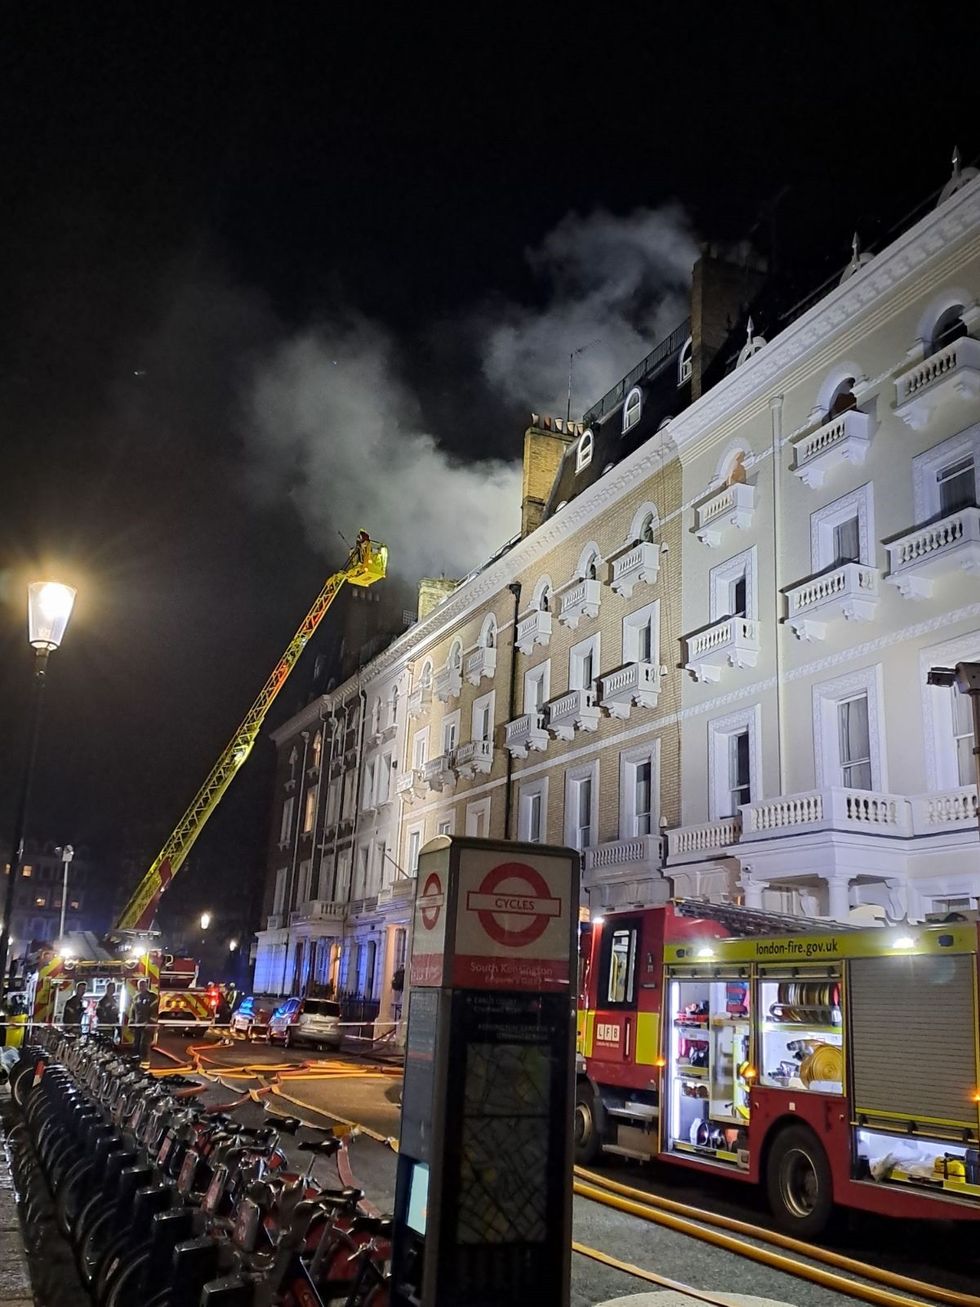 Around 15 people left the building when blaze started and before firefighters arrived